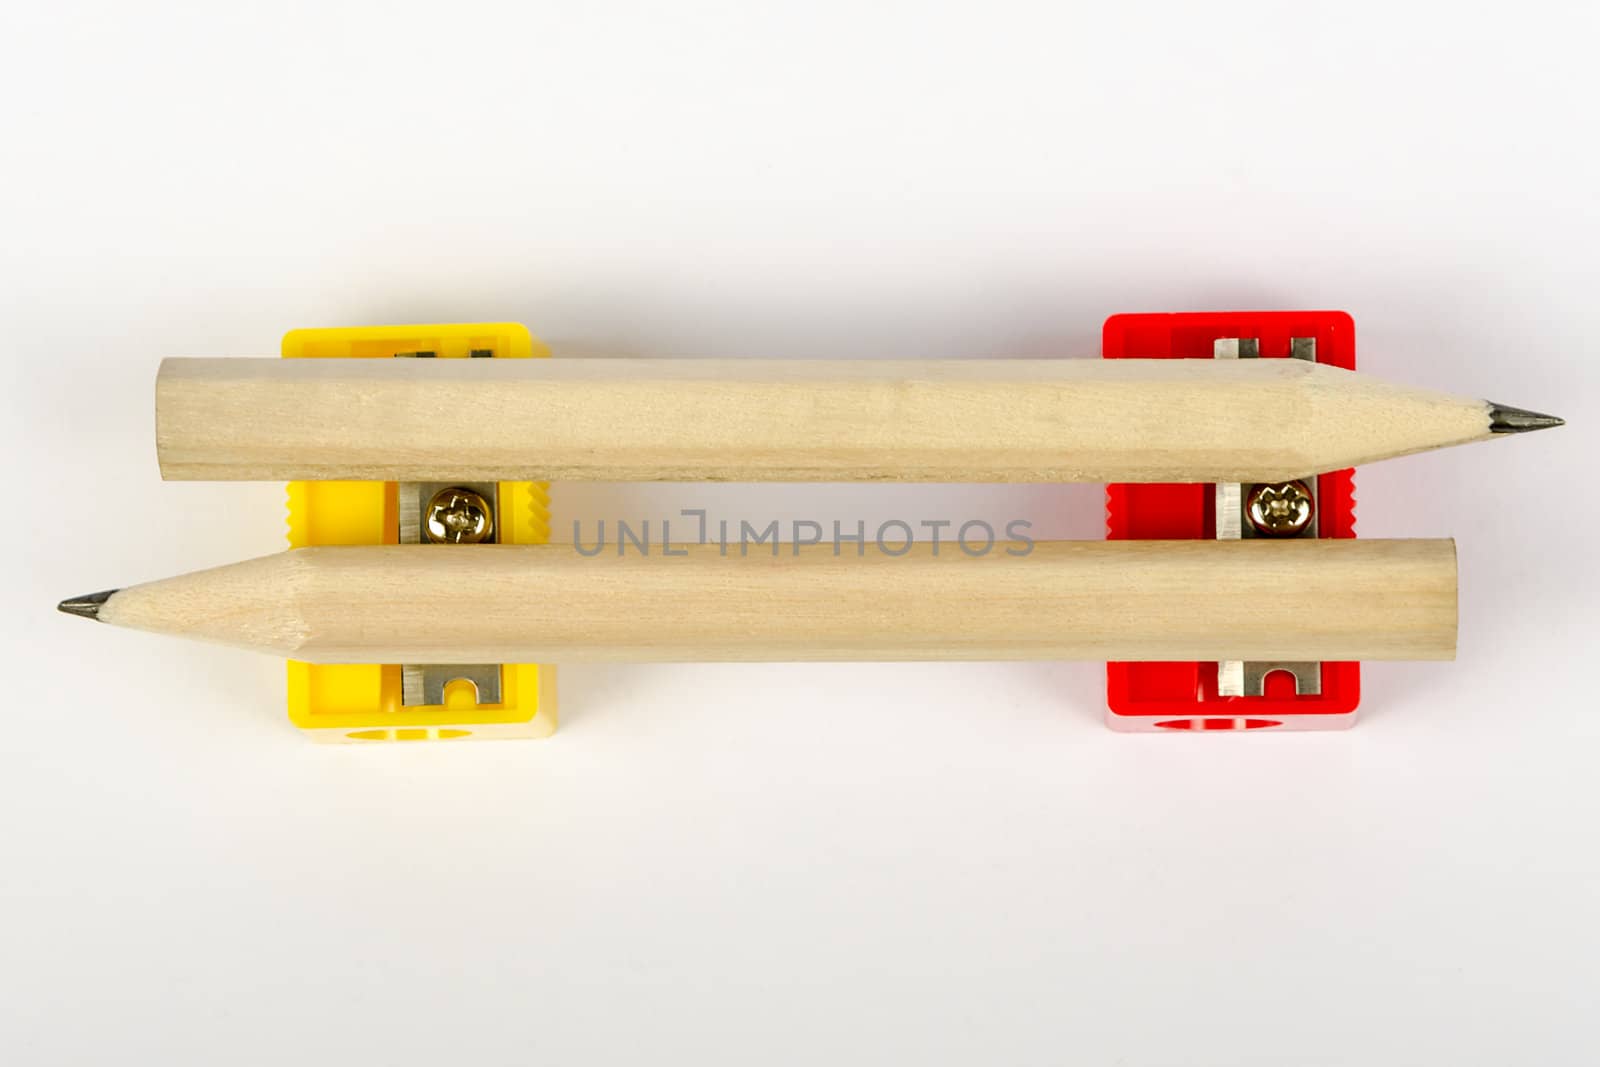 Two wooden pencils with sharpeners red and yellow on a white background